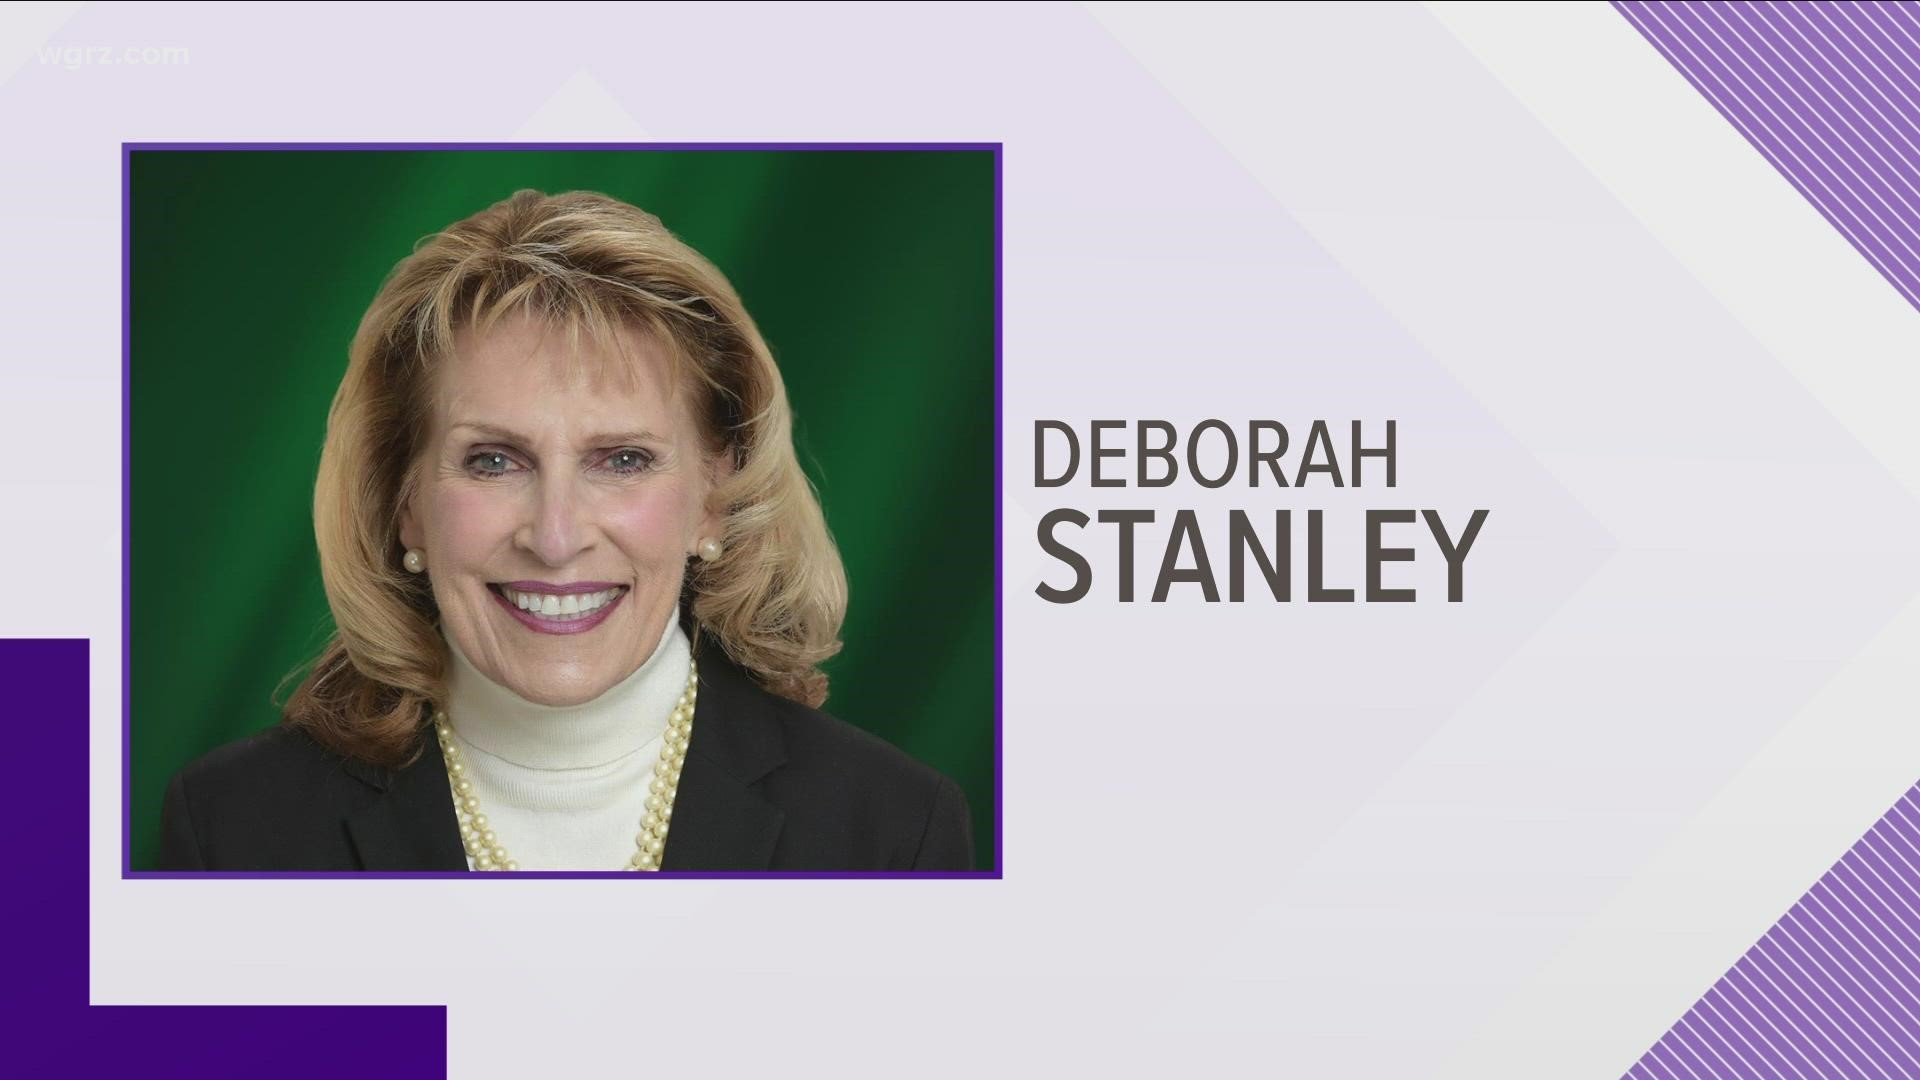 The board has named SUNY Oswego president Deborah Stanley as the interim chancellor starting January 15th...